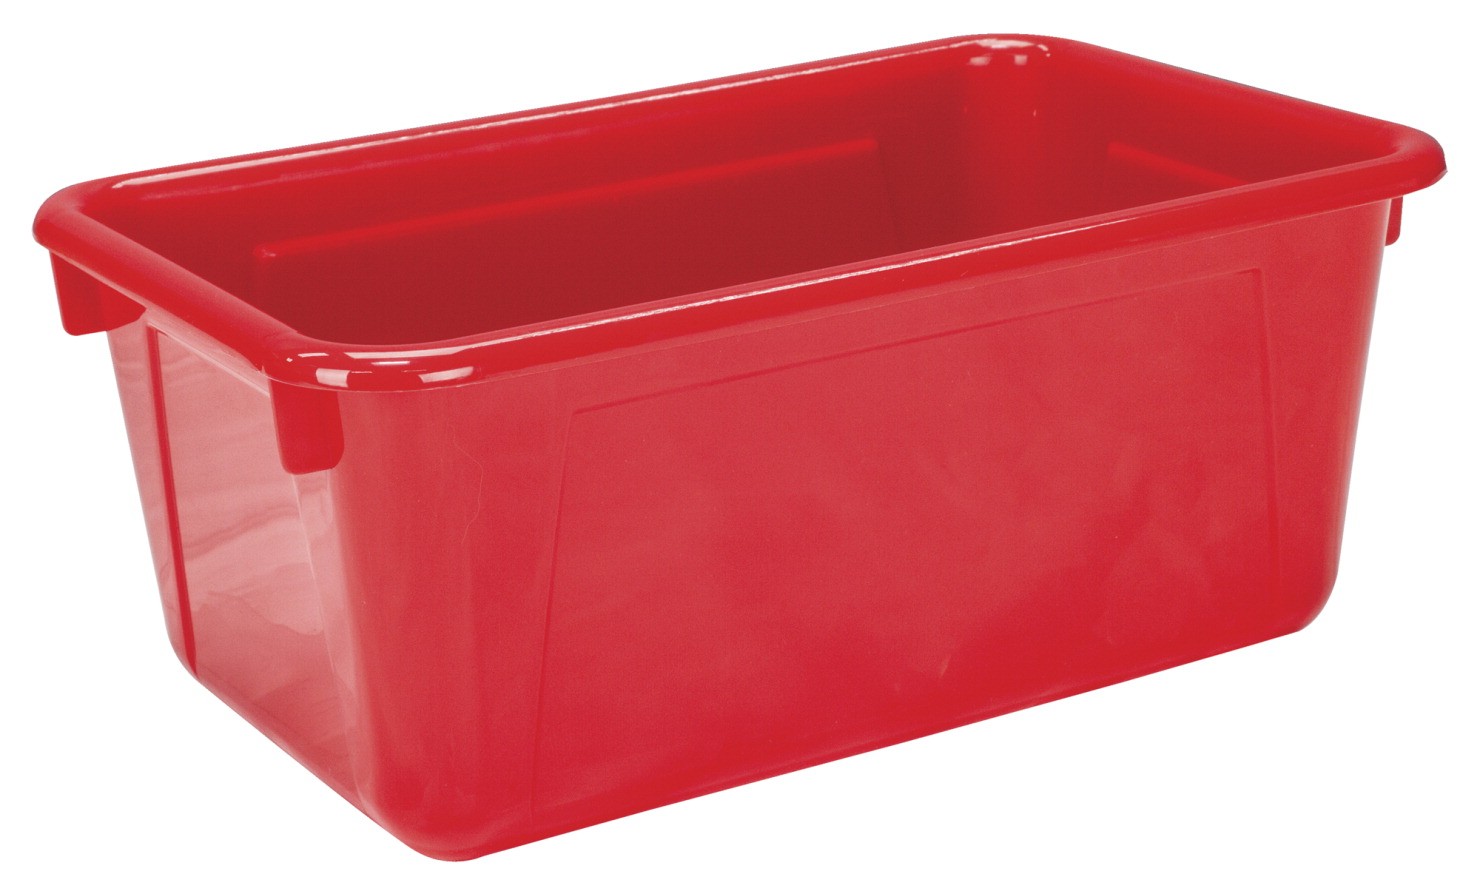 Red Tote Tray, 12 X 8 X 5 In., Plastic (Clear Lid #081970)